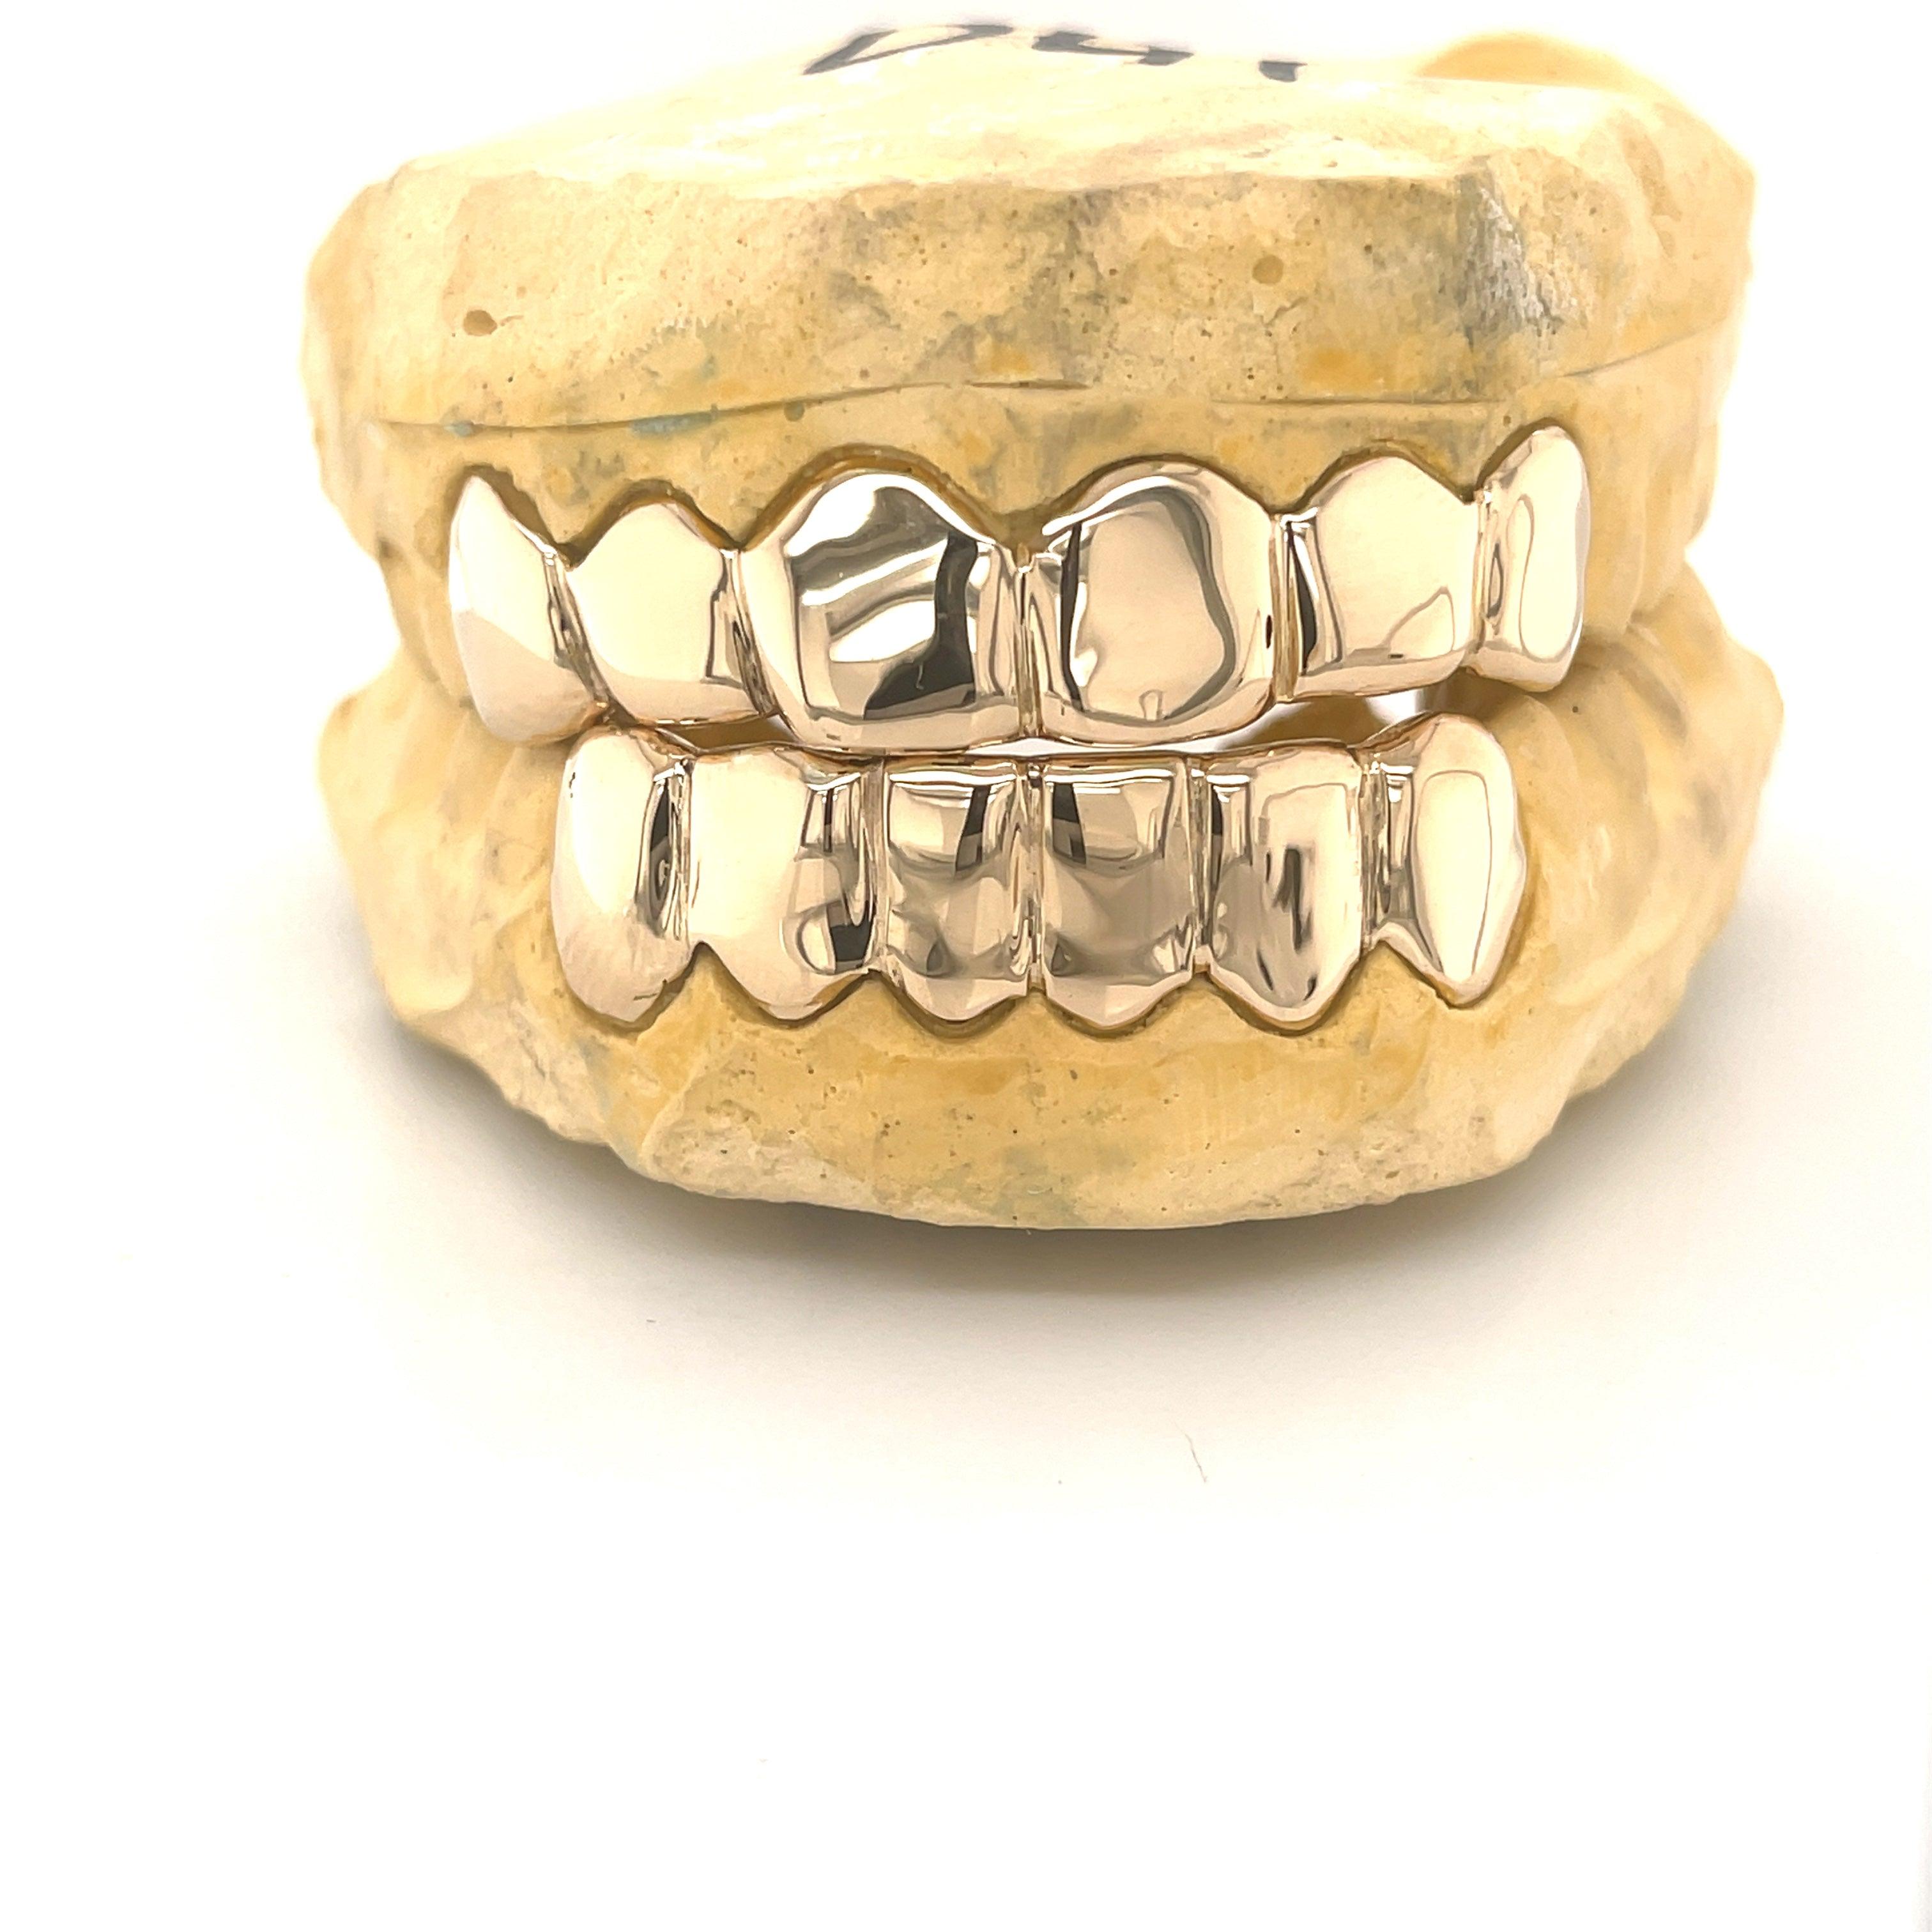 12pc Gold High Polished Grillz - Seattle Gold Grillz